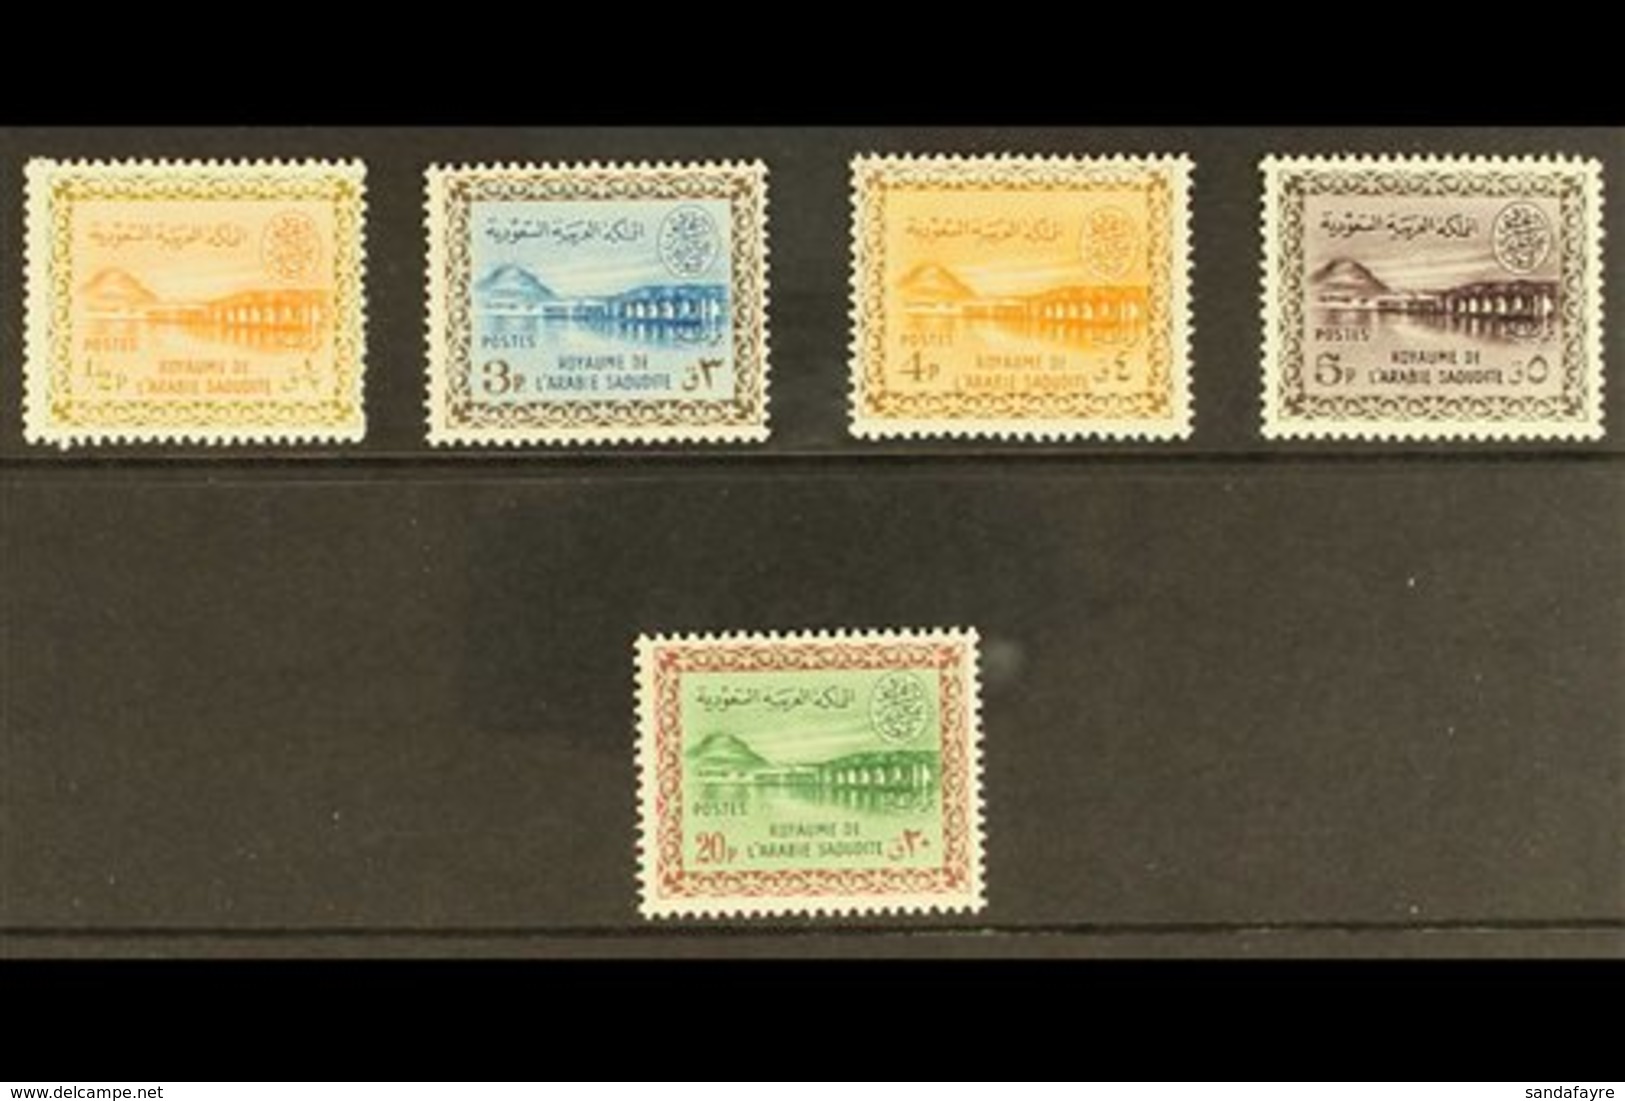 1963 - 65 Wadi Hanifa Dam Set With Wmk Complete, SG 476/80, Very Fine Never Hinged Mint. (5 Stamps) For More Images, Ple - Saoedi-Arabië